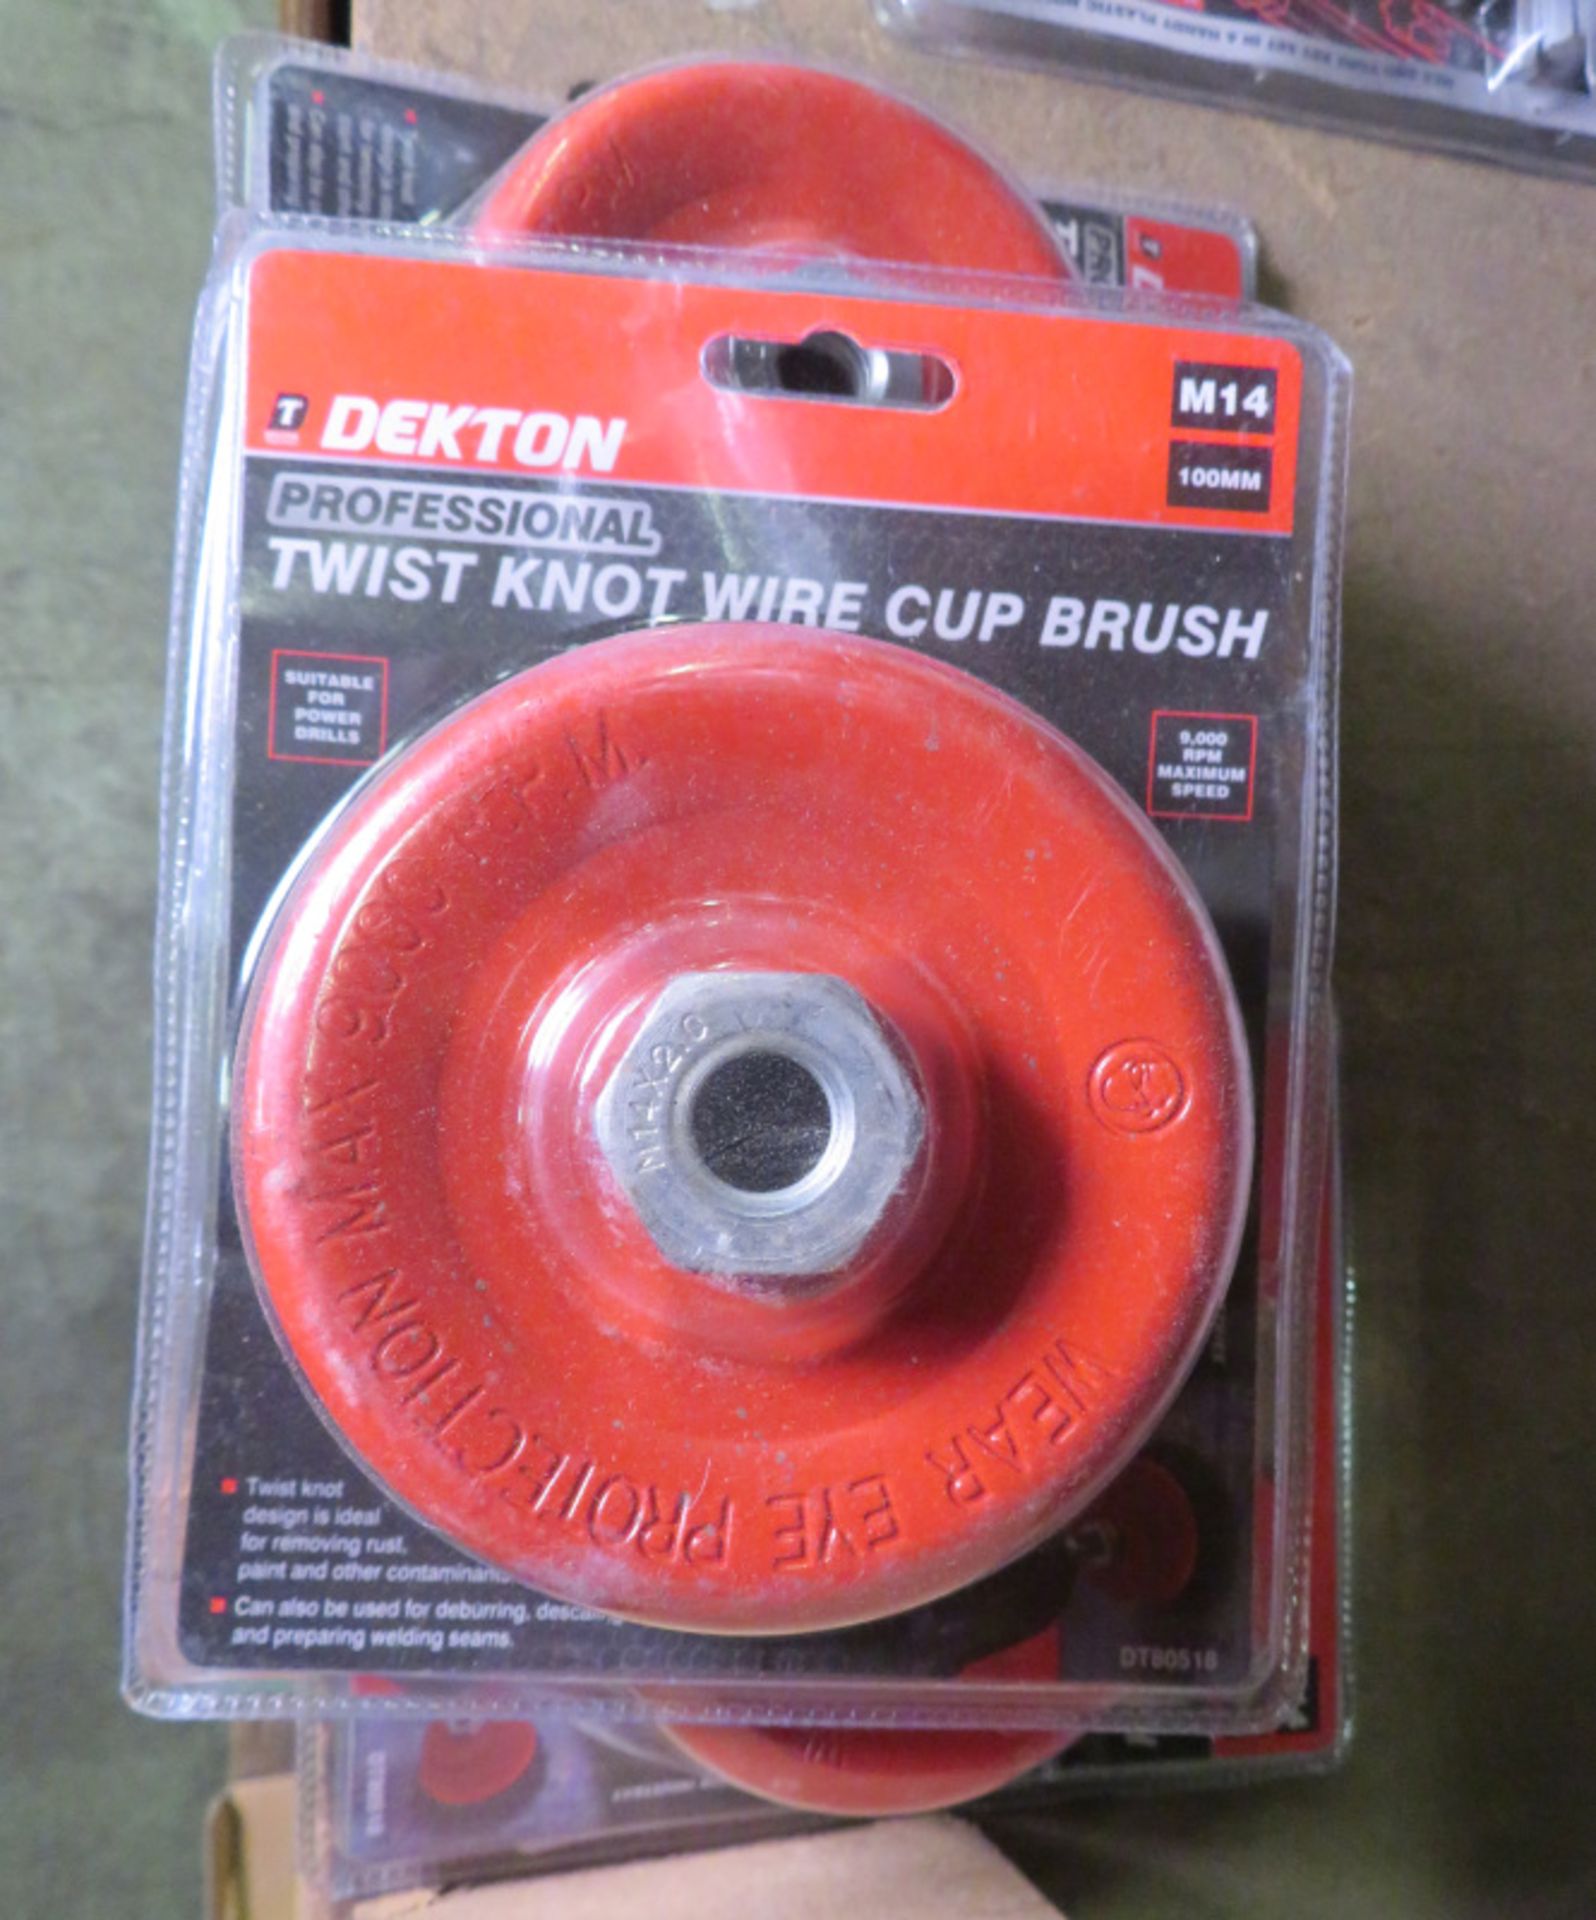 3x Dekton M14 100mm professional twist knot wire cup brushes - Image 2 of 2